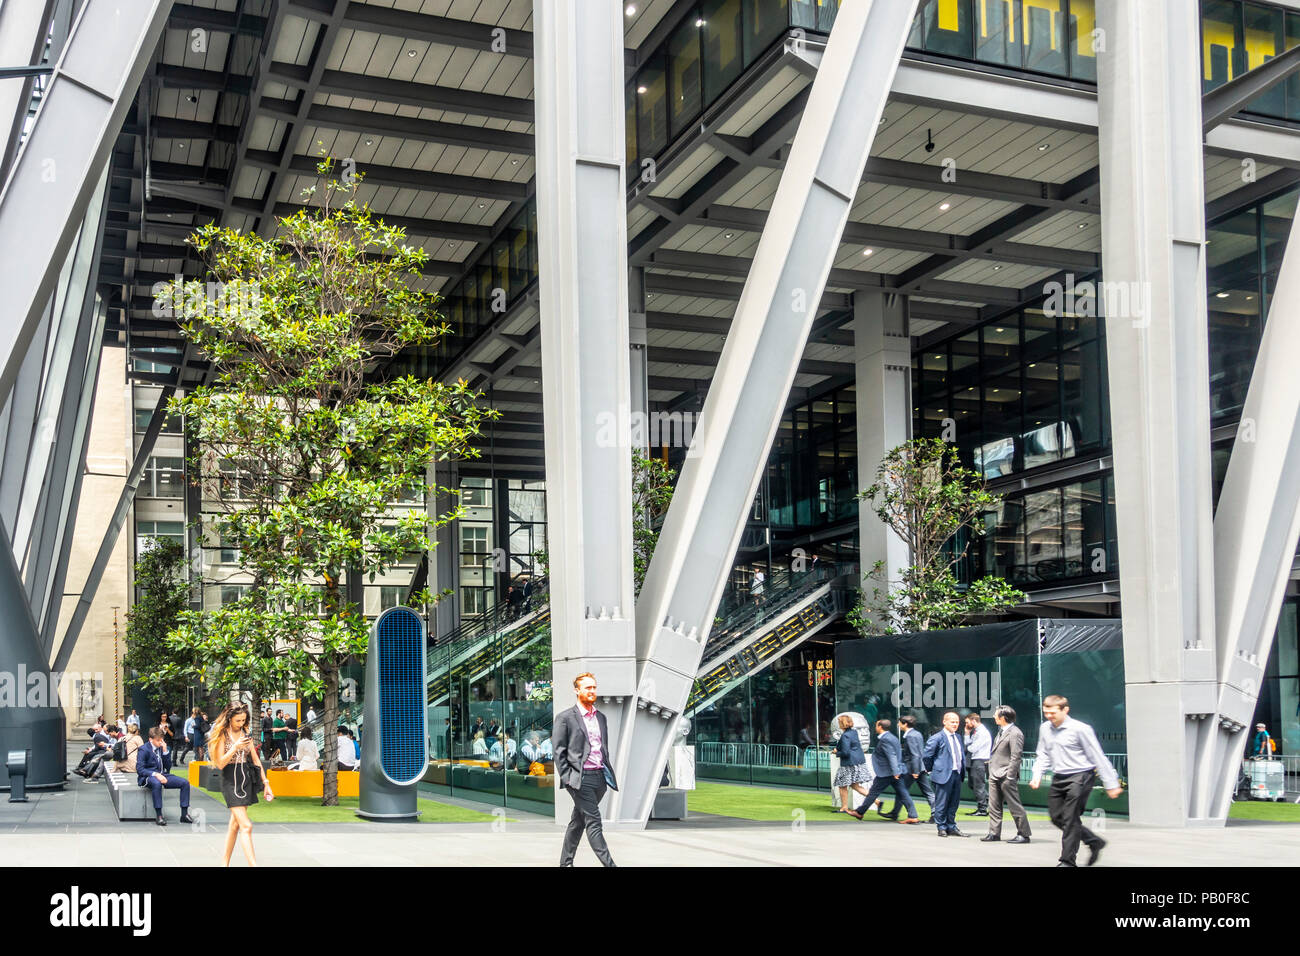 Men and women using and walking past the public space atrium at the foot of the Leadenhall Building in central London, England, UK Stock Photo